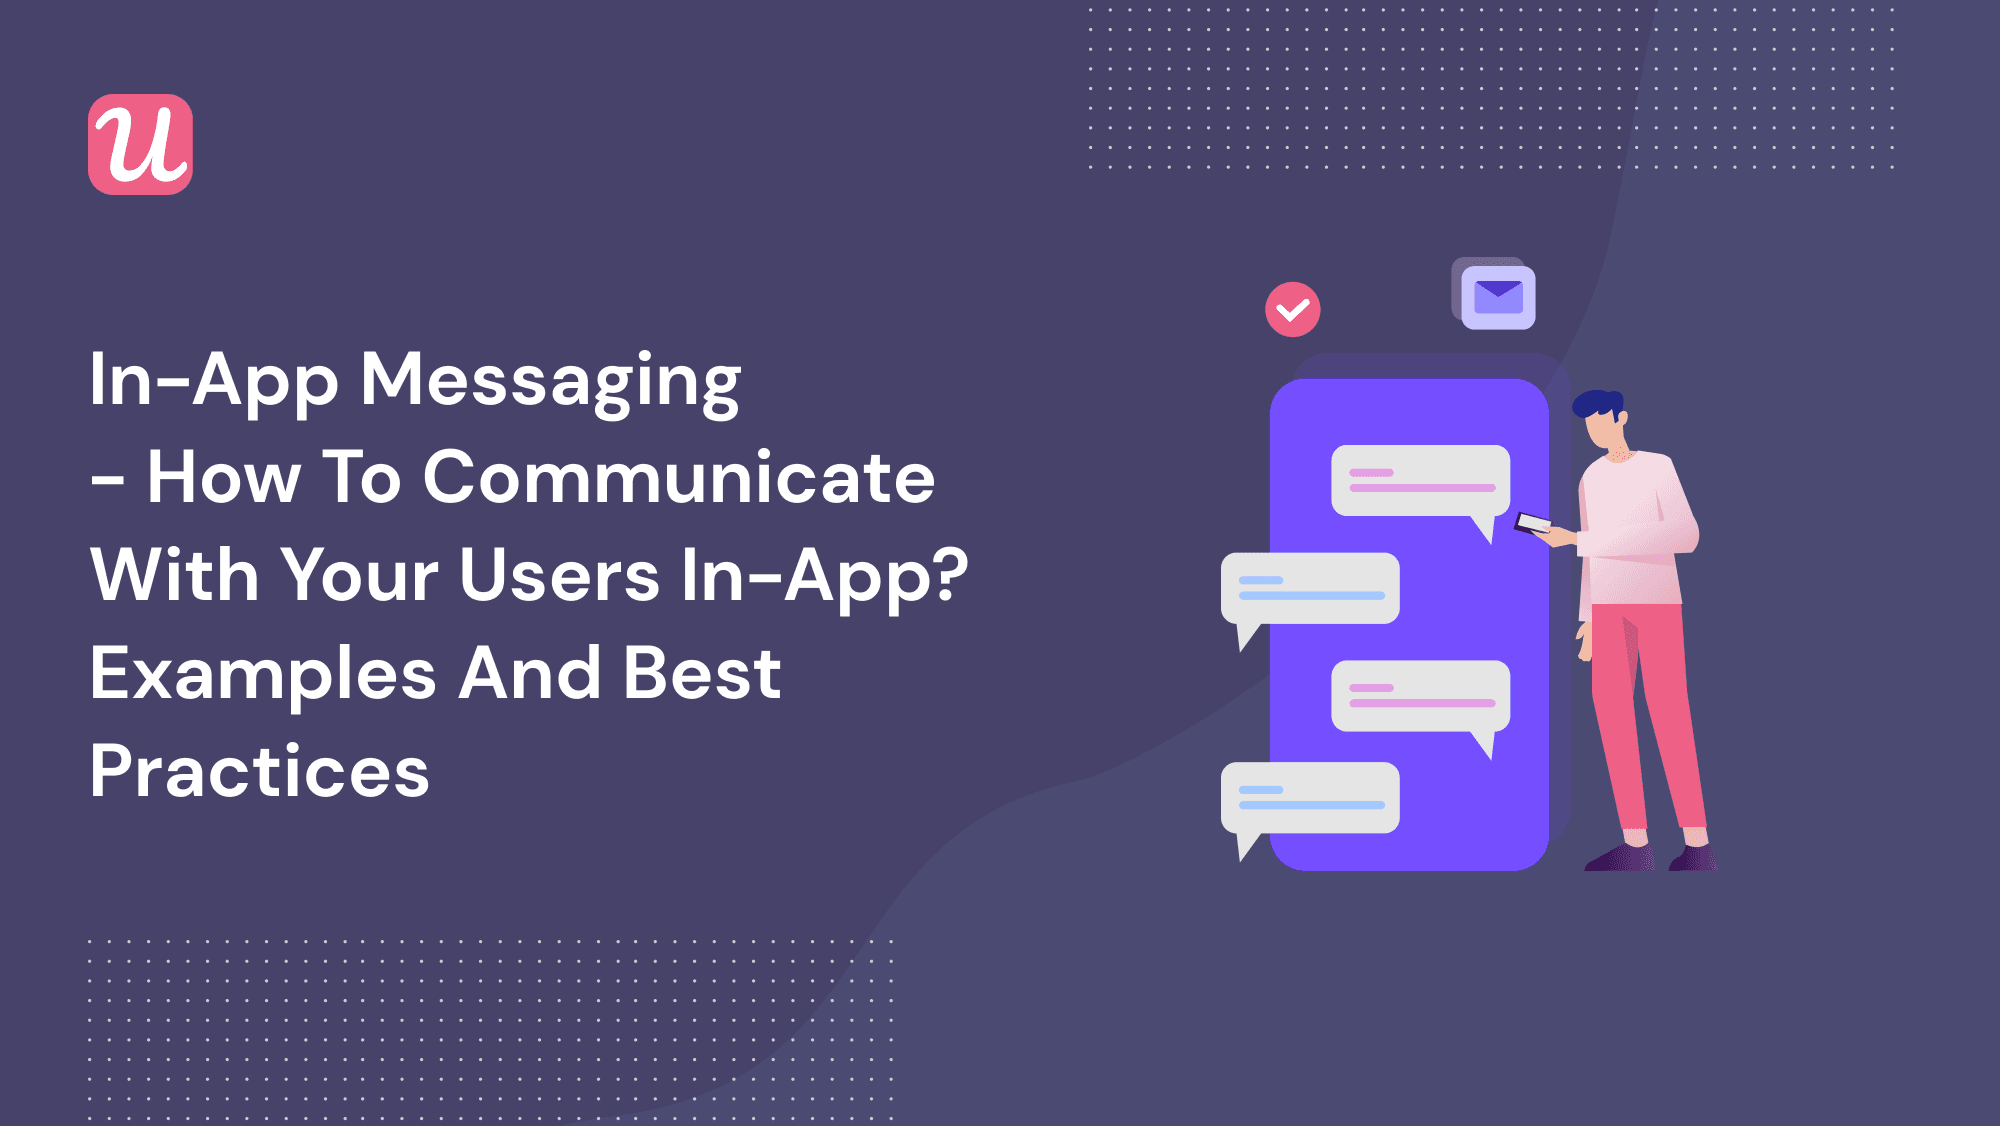 In-App Messaging – How to Communicate With Your Users In-App? [Examples and Best Practices]